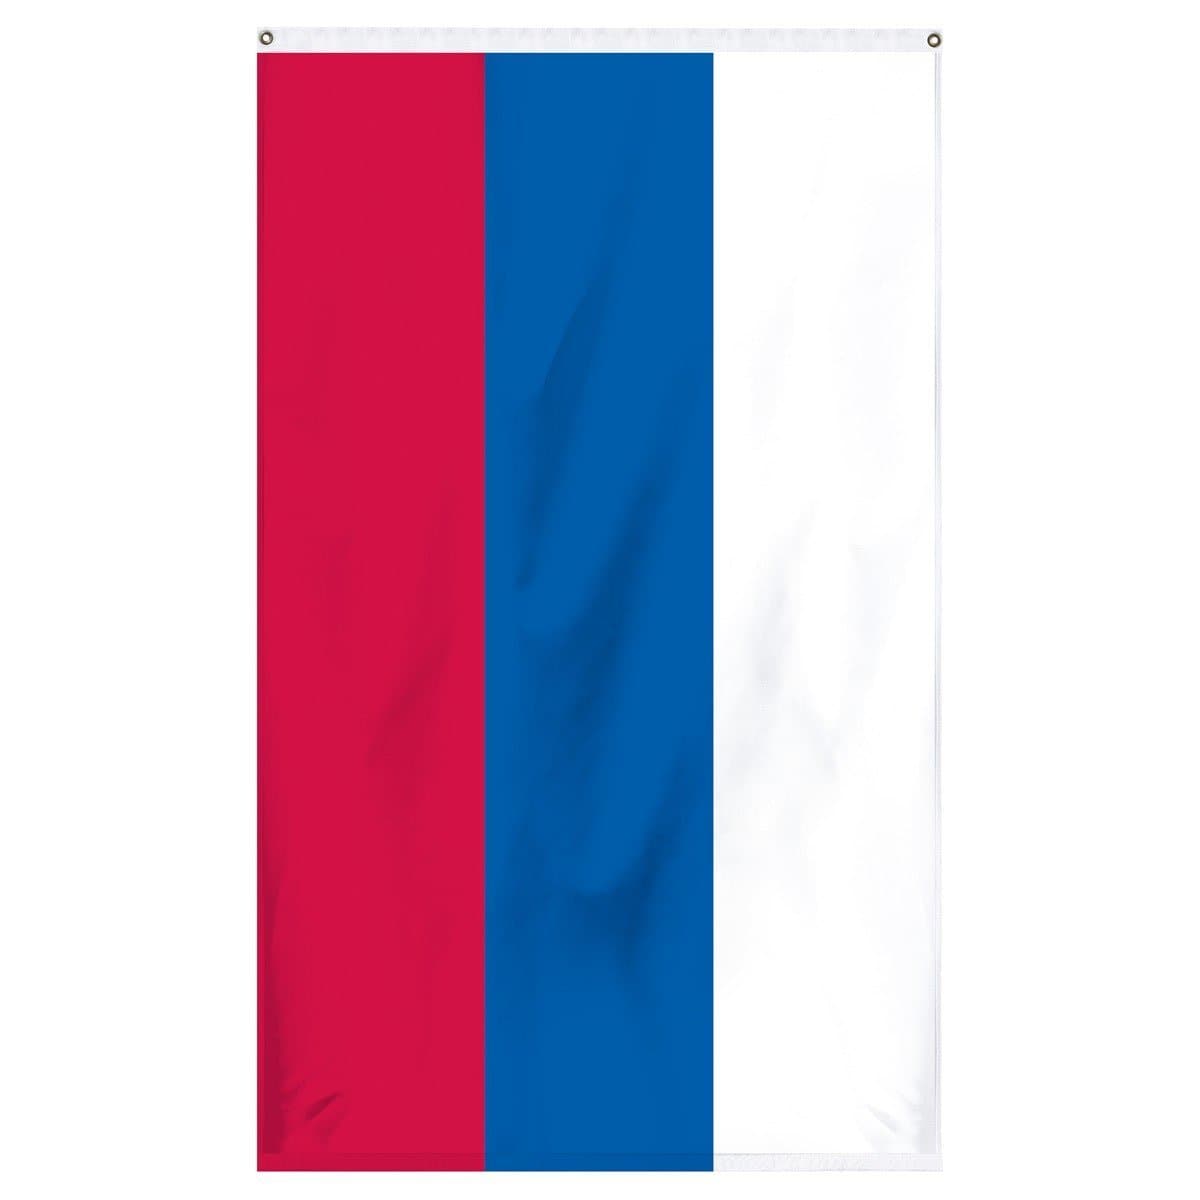 Russian Flag - National Flag of the Russian Federation